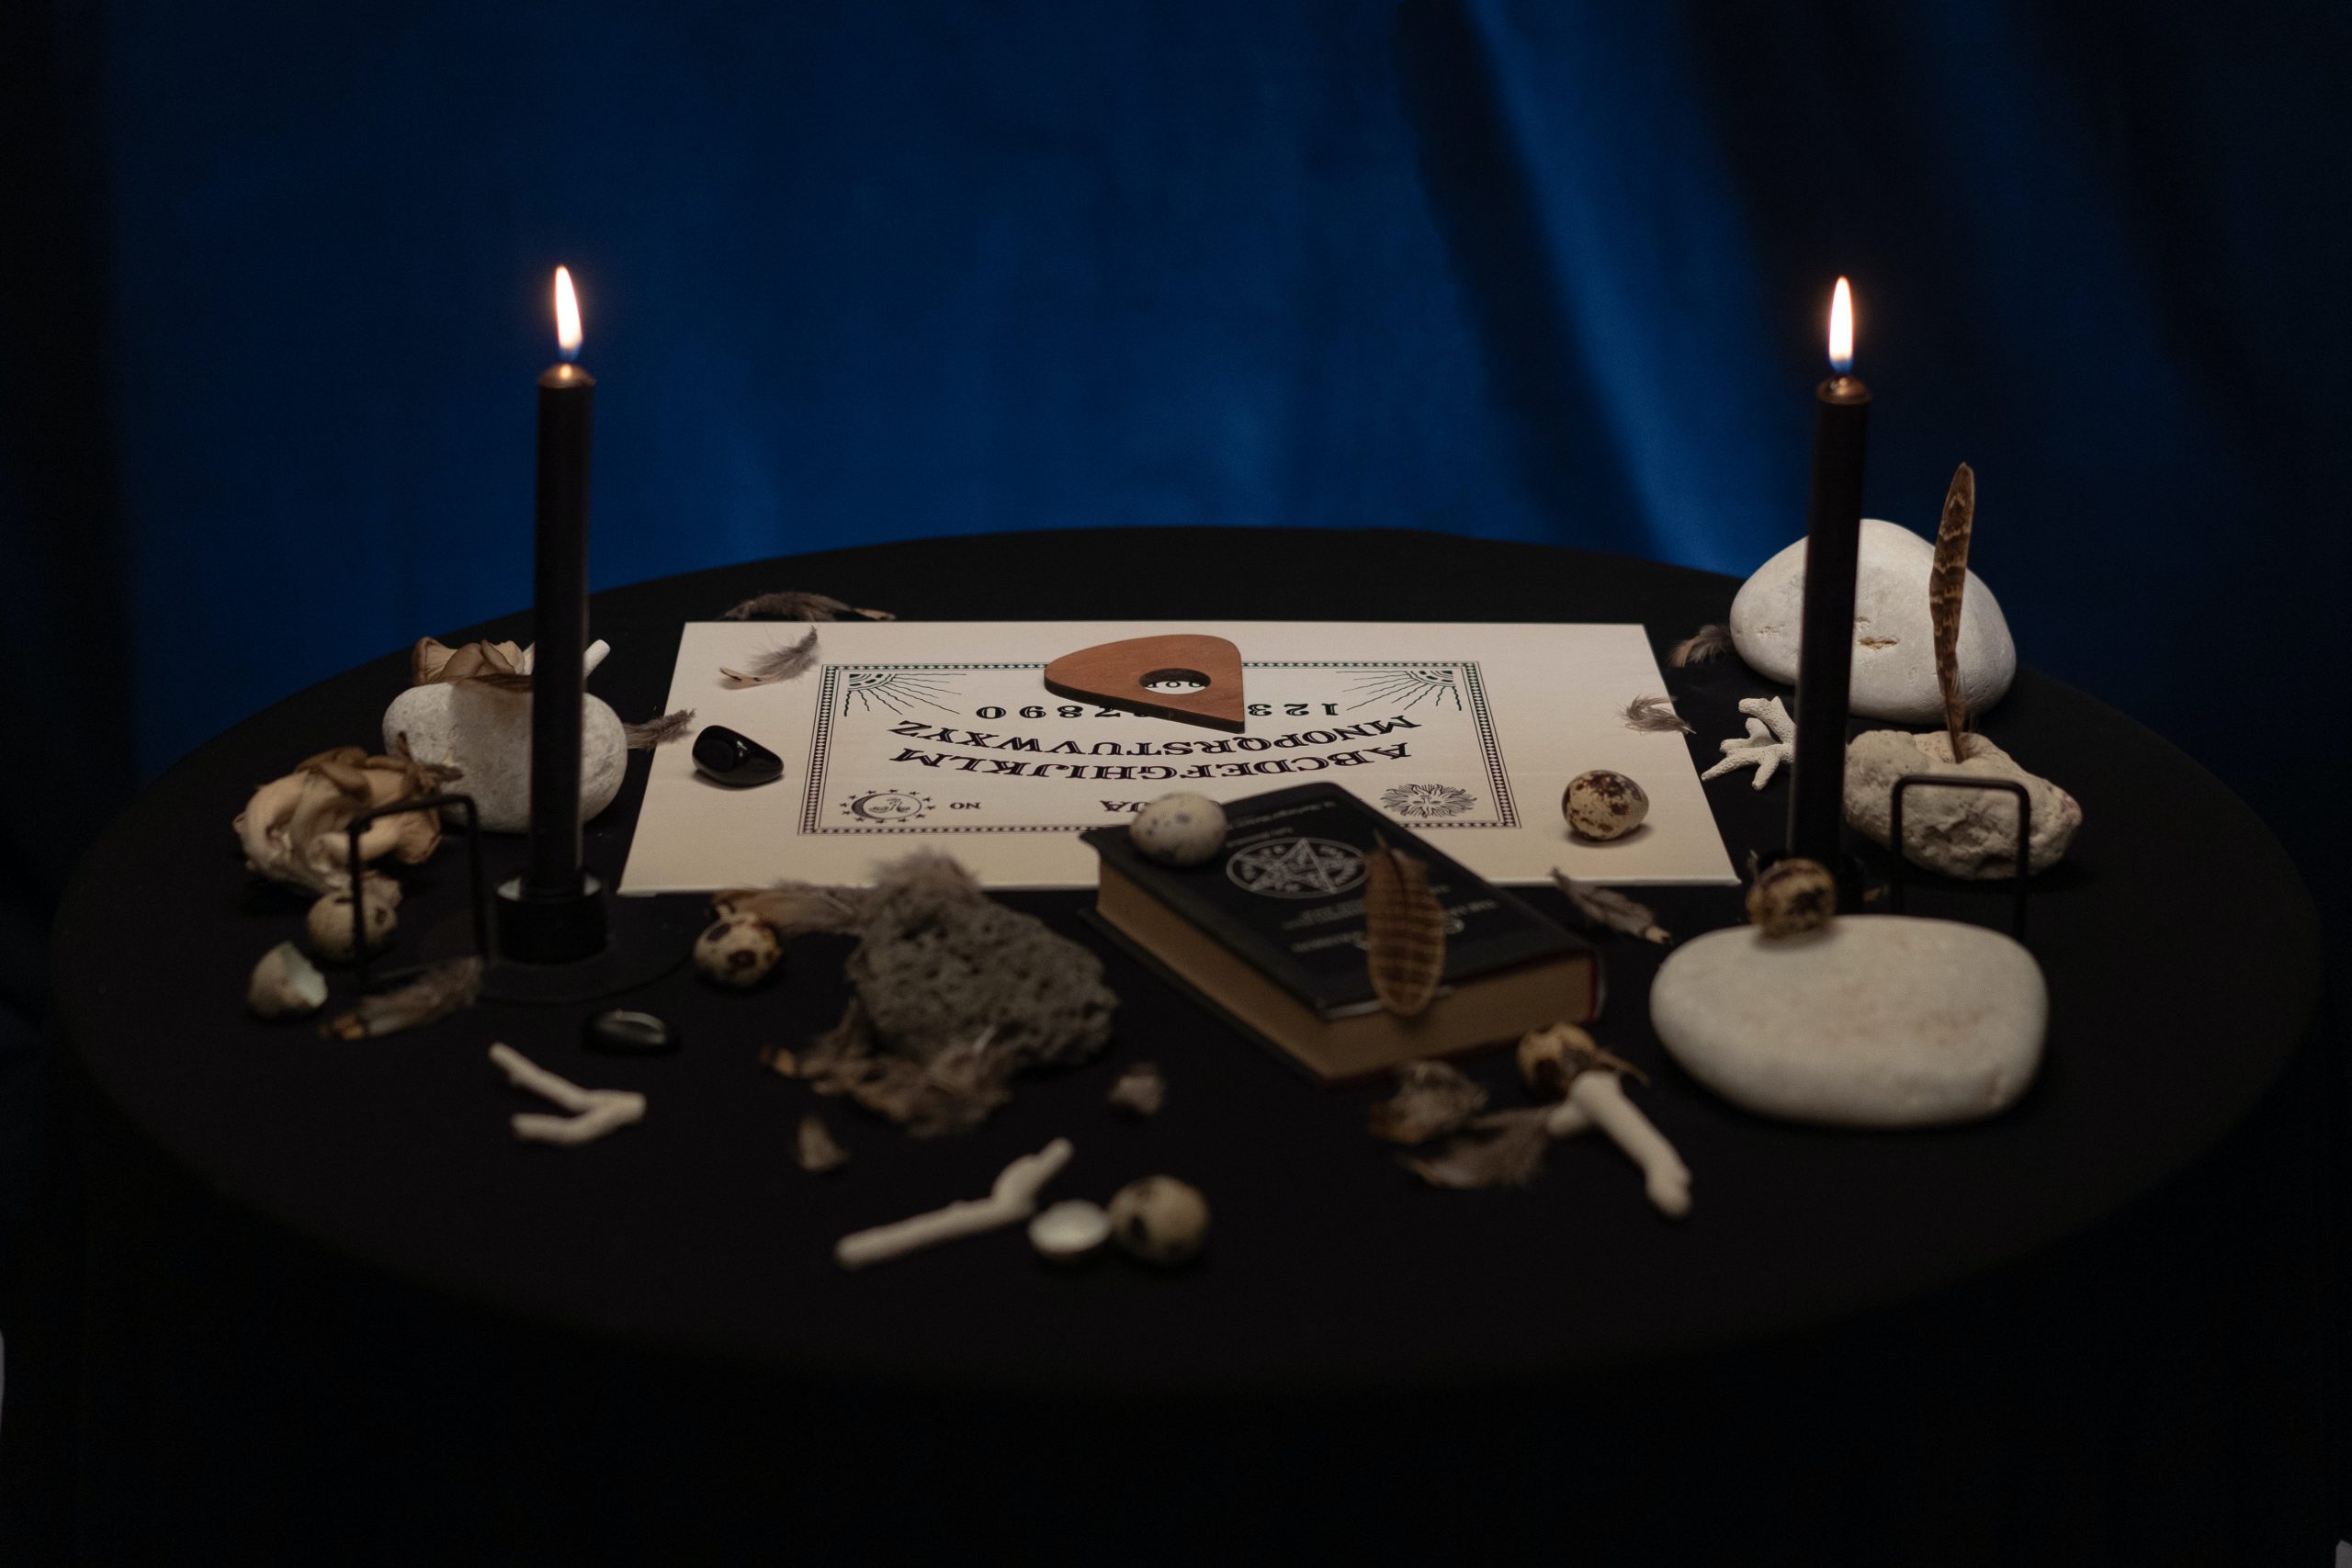 wicca alter stones bones black magic book feathers candles ouija board